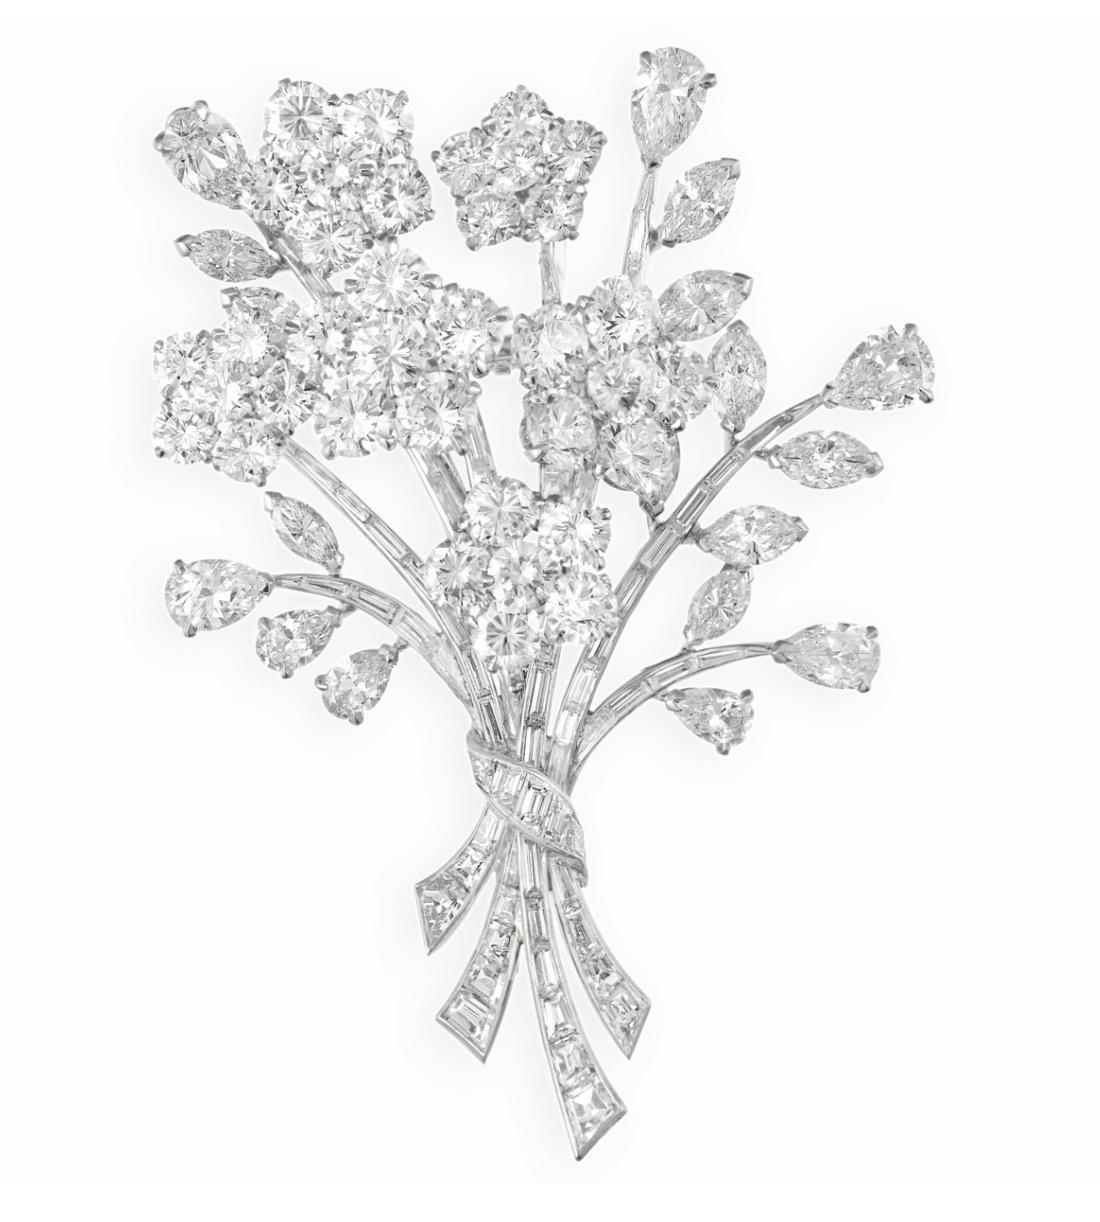 Van Cleef & Arpels Diamond Bouquet Brooch.
This diamond brooch has circular, pear, marquise and baguette-cut diamonds weighing a total of approximately 20carats, diamond are   E/F color and  VS clarity.
Six large flowers have center diamonds ranging